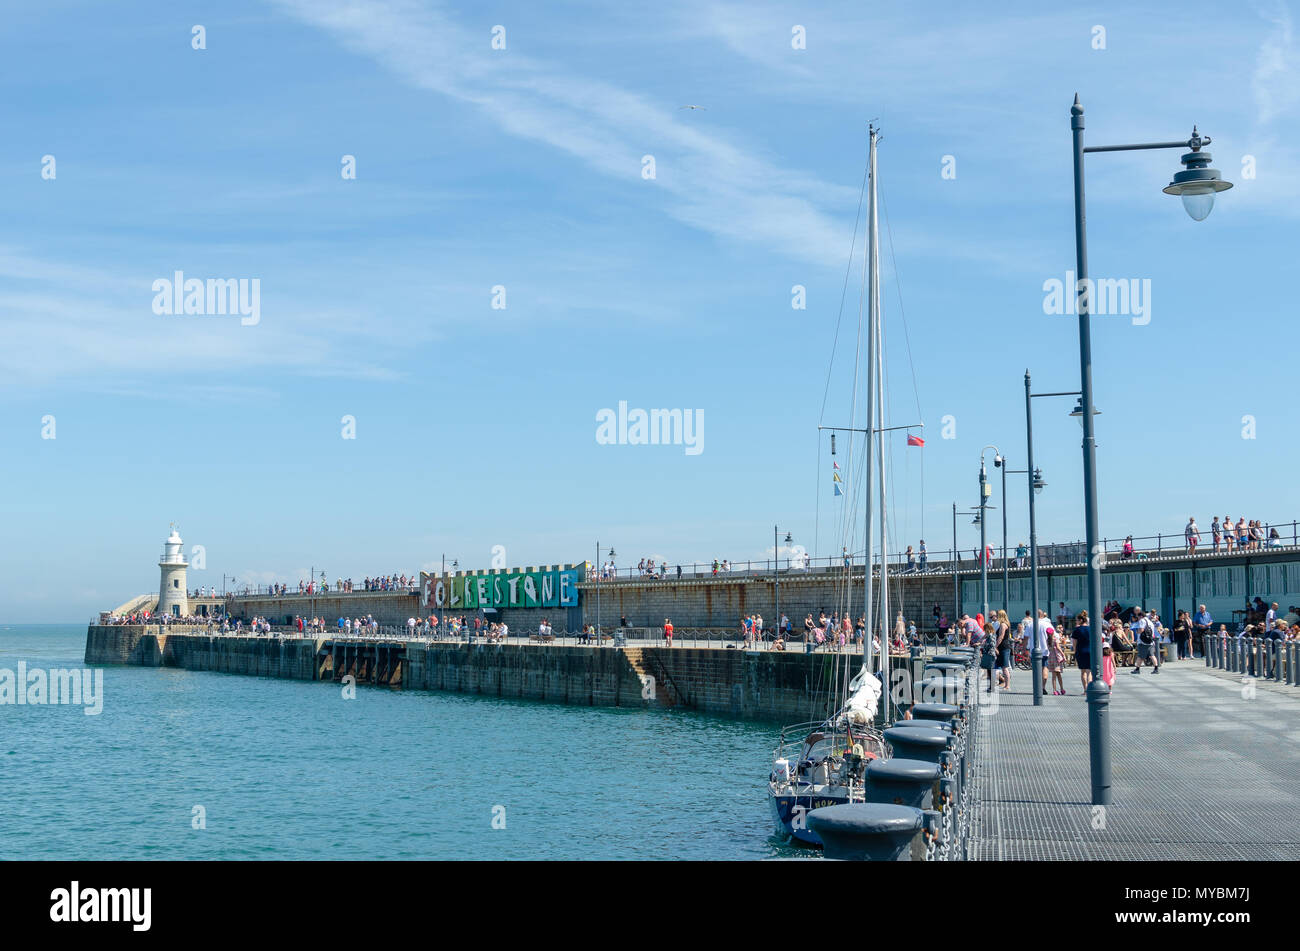 Weekend activities at the Folkestone Harbour Arm by the English channel in Kent, England Stock Photo